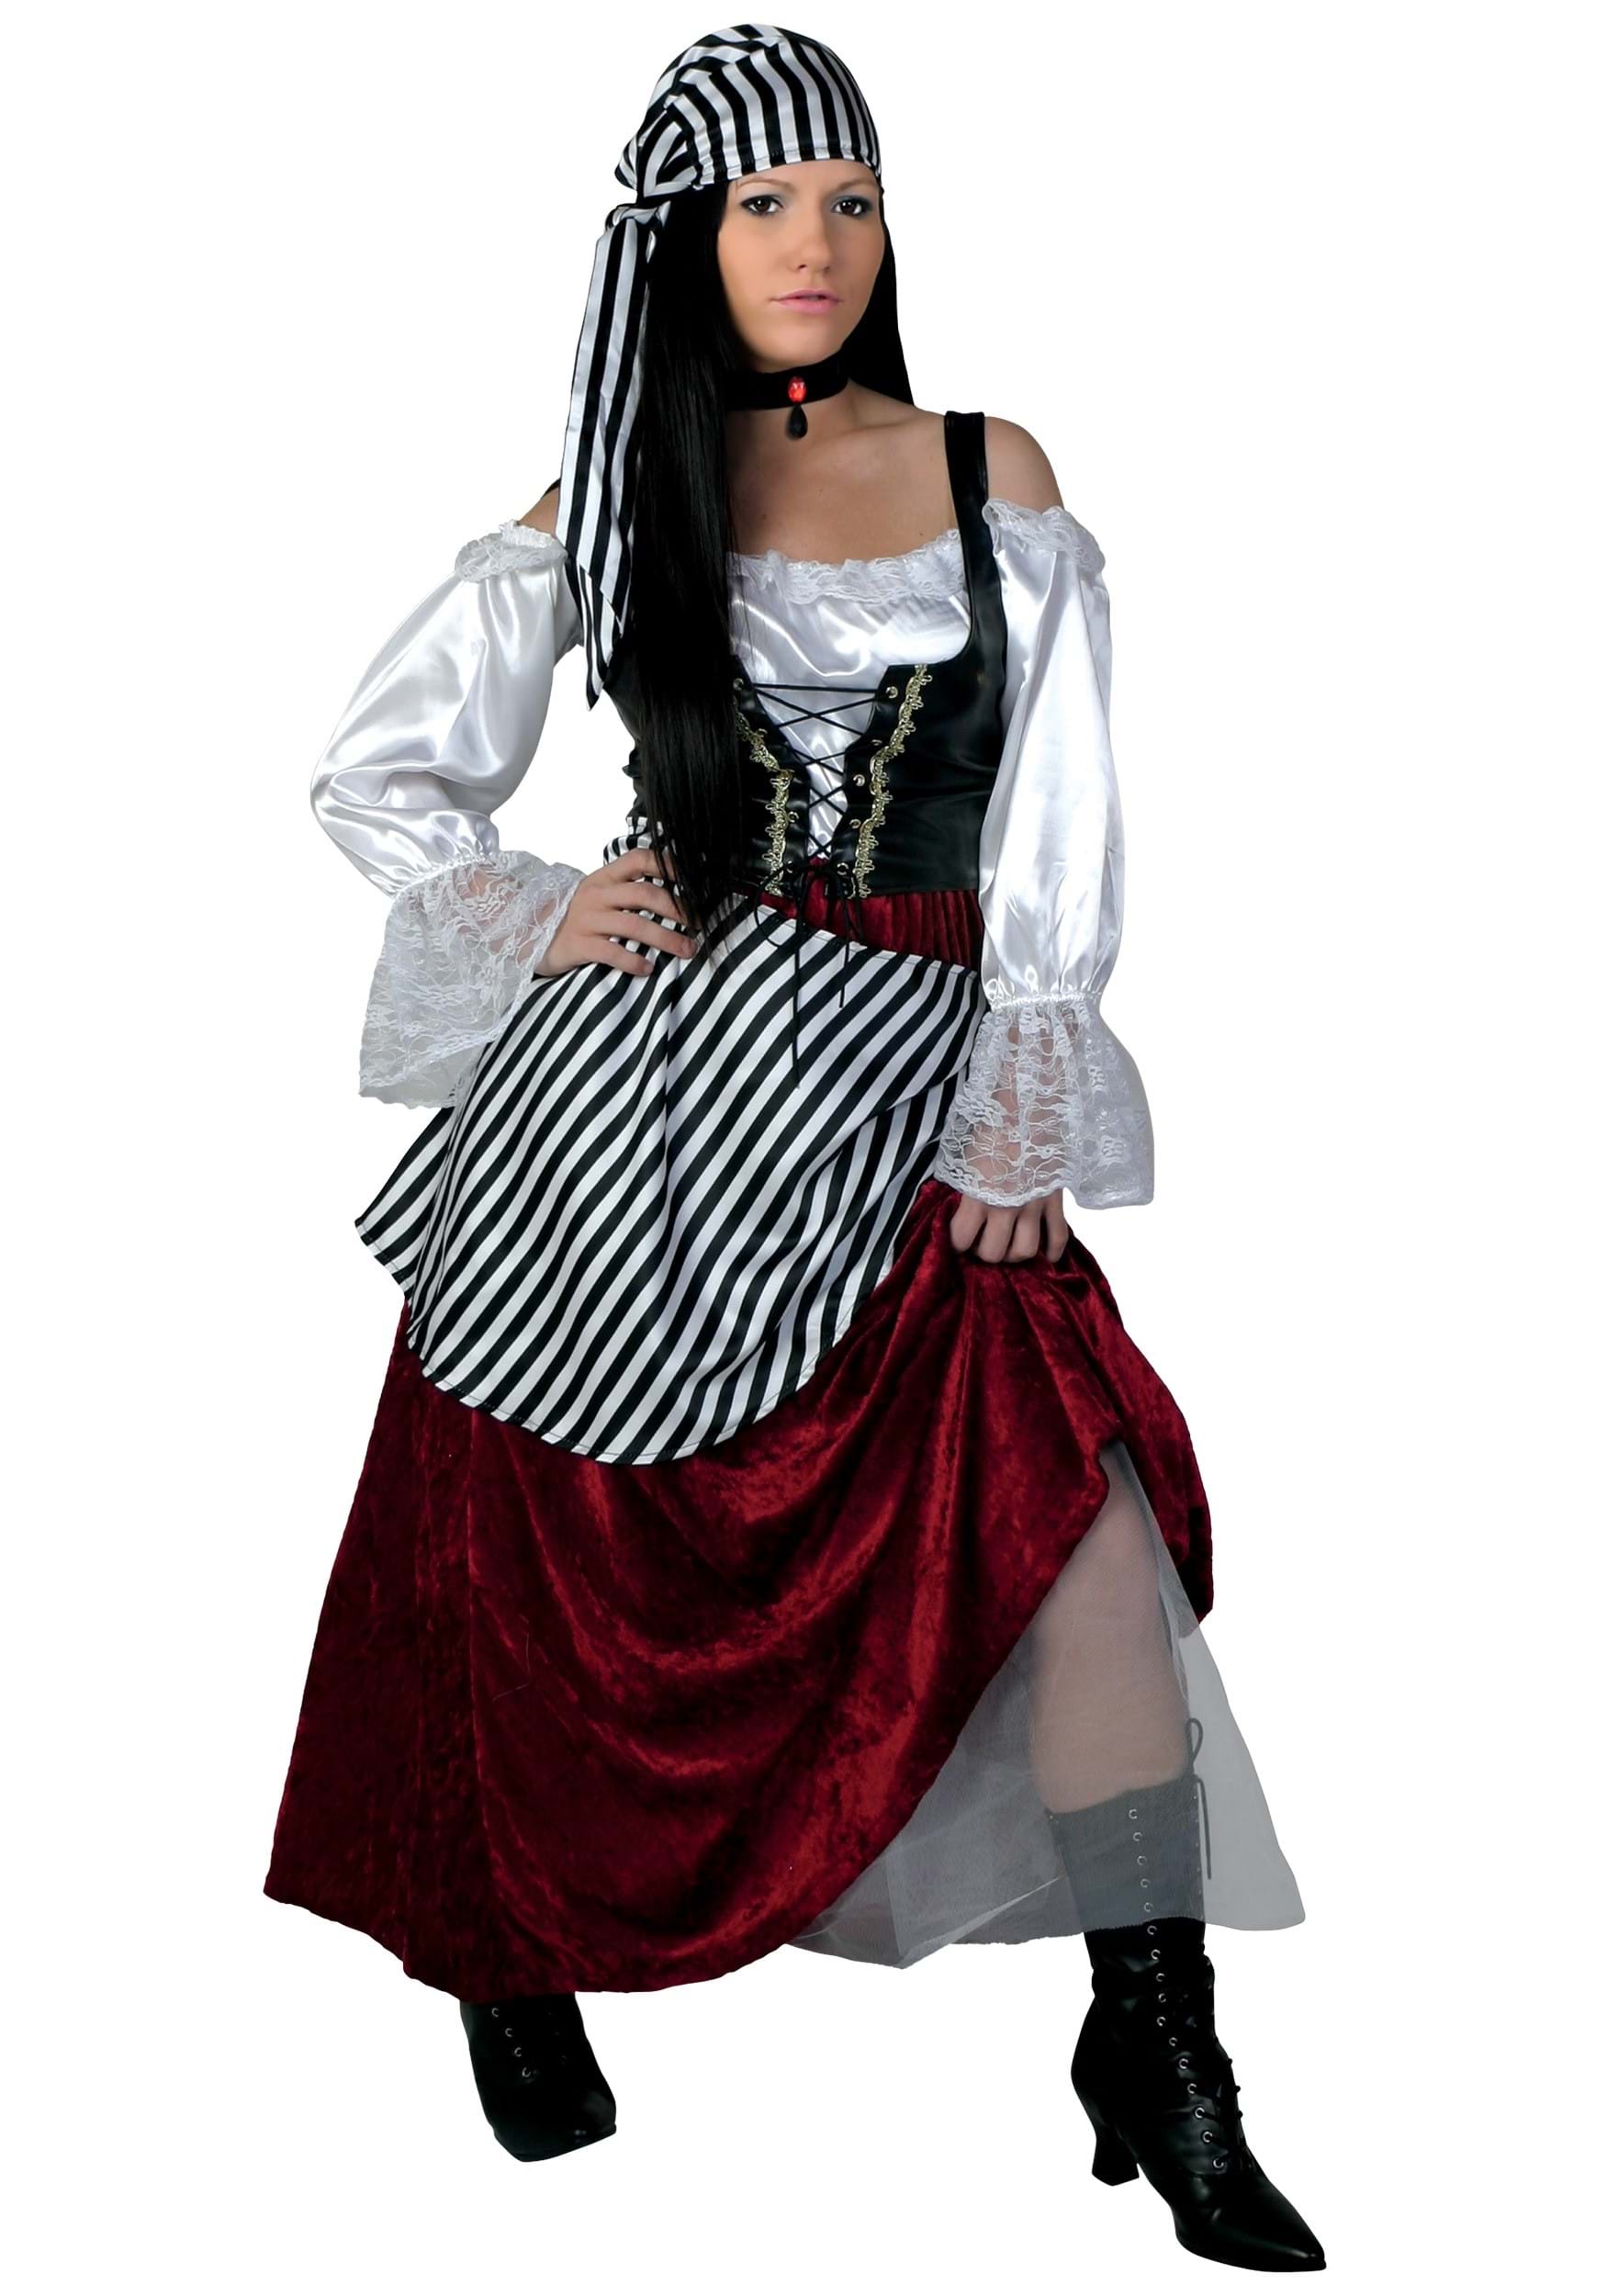 Fun Costumes Deluxe Pirate Wench Costume White Large (12-14)